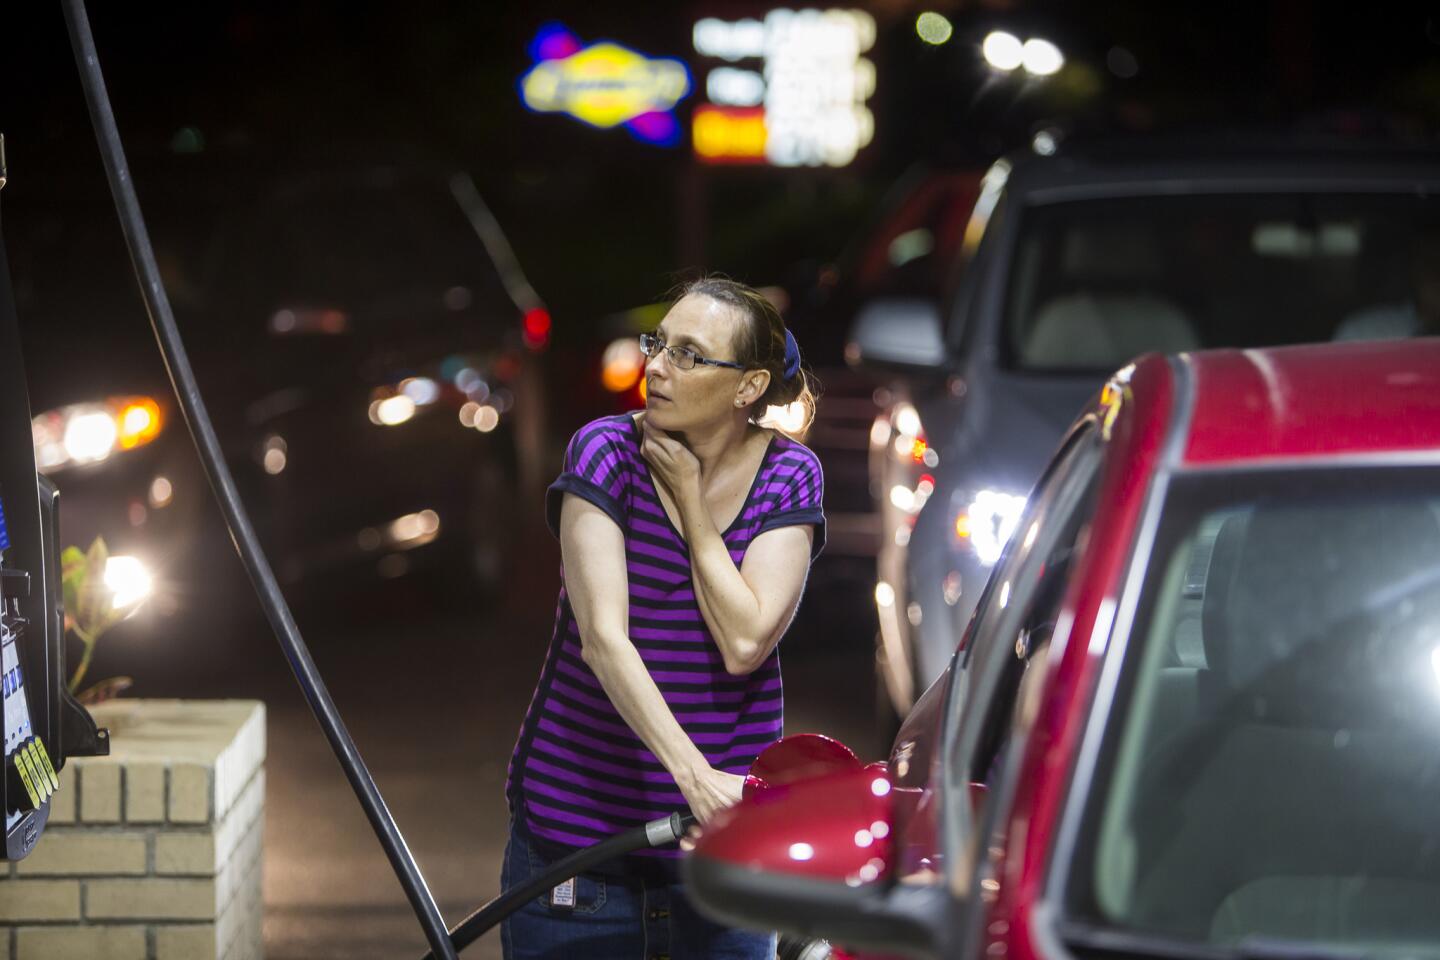 Beth Johnson fills up her car after waiting in line at a Sunoco gas station in advance of Hurricane Matthew in Mt. Pleasant, S.C., Tuesday, Oct. 4, 2016.